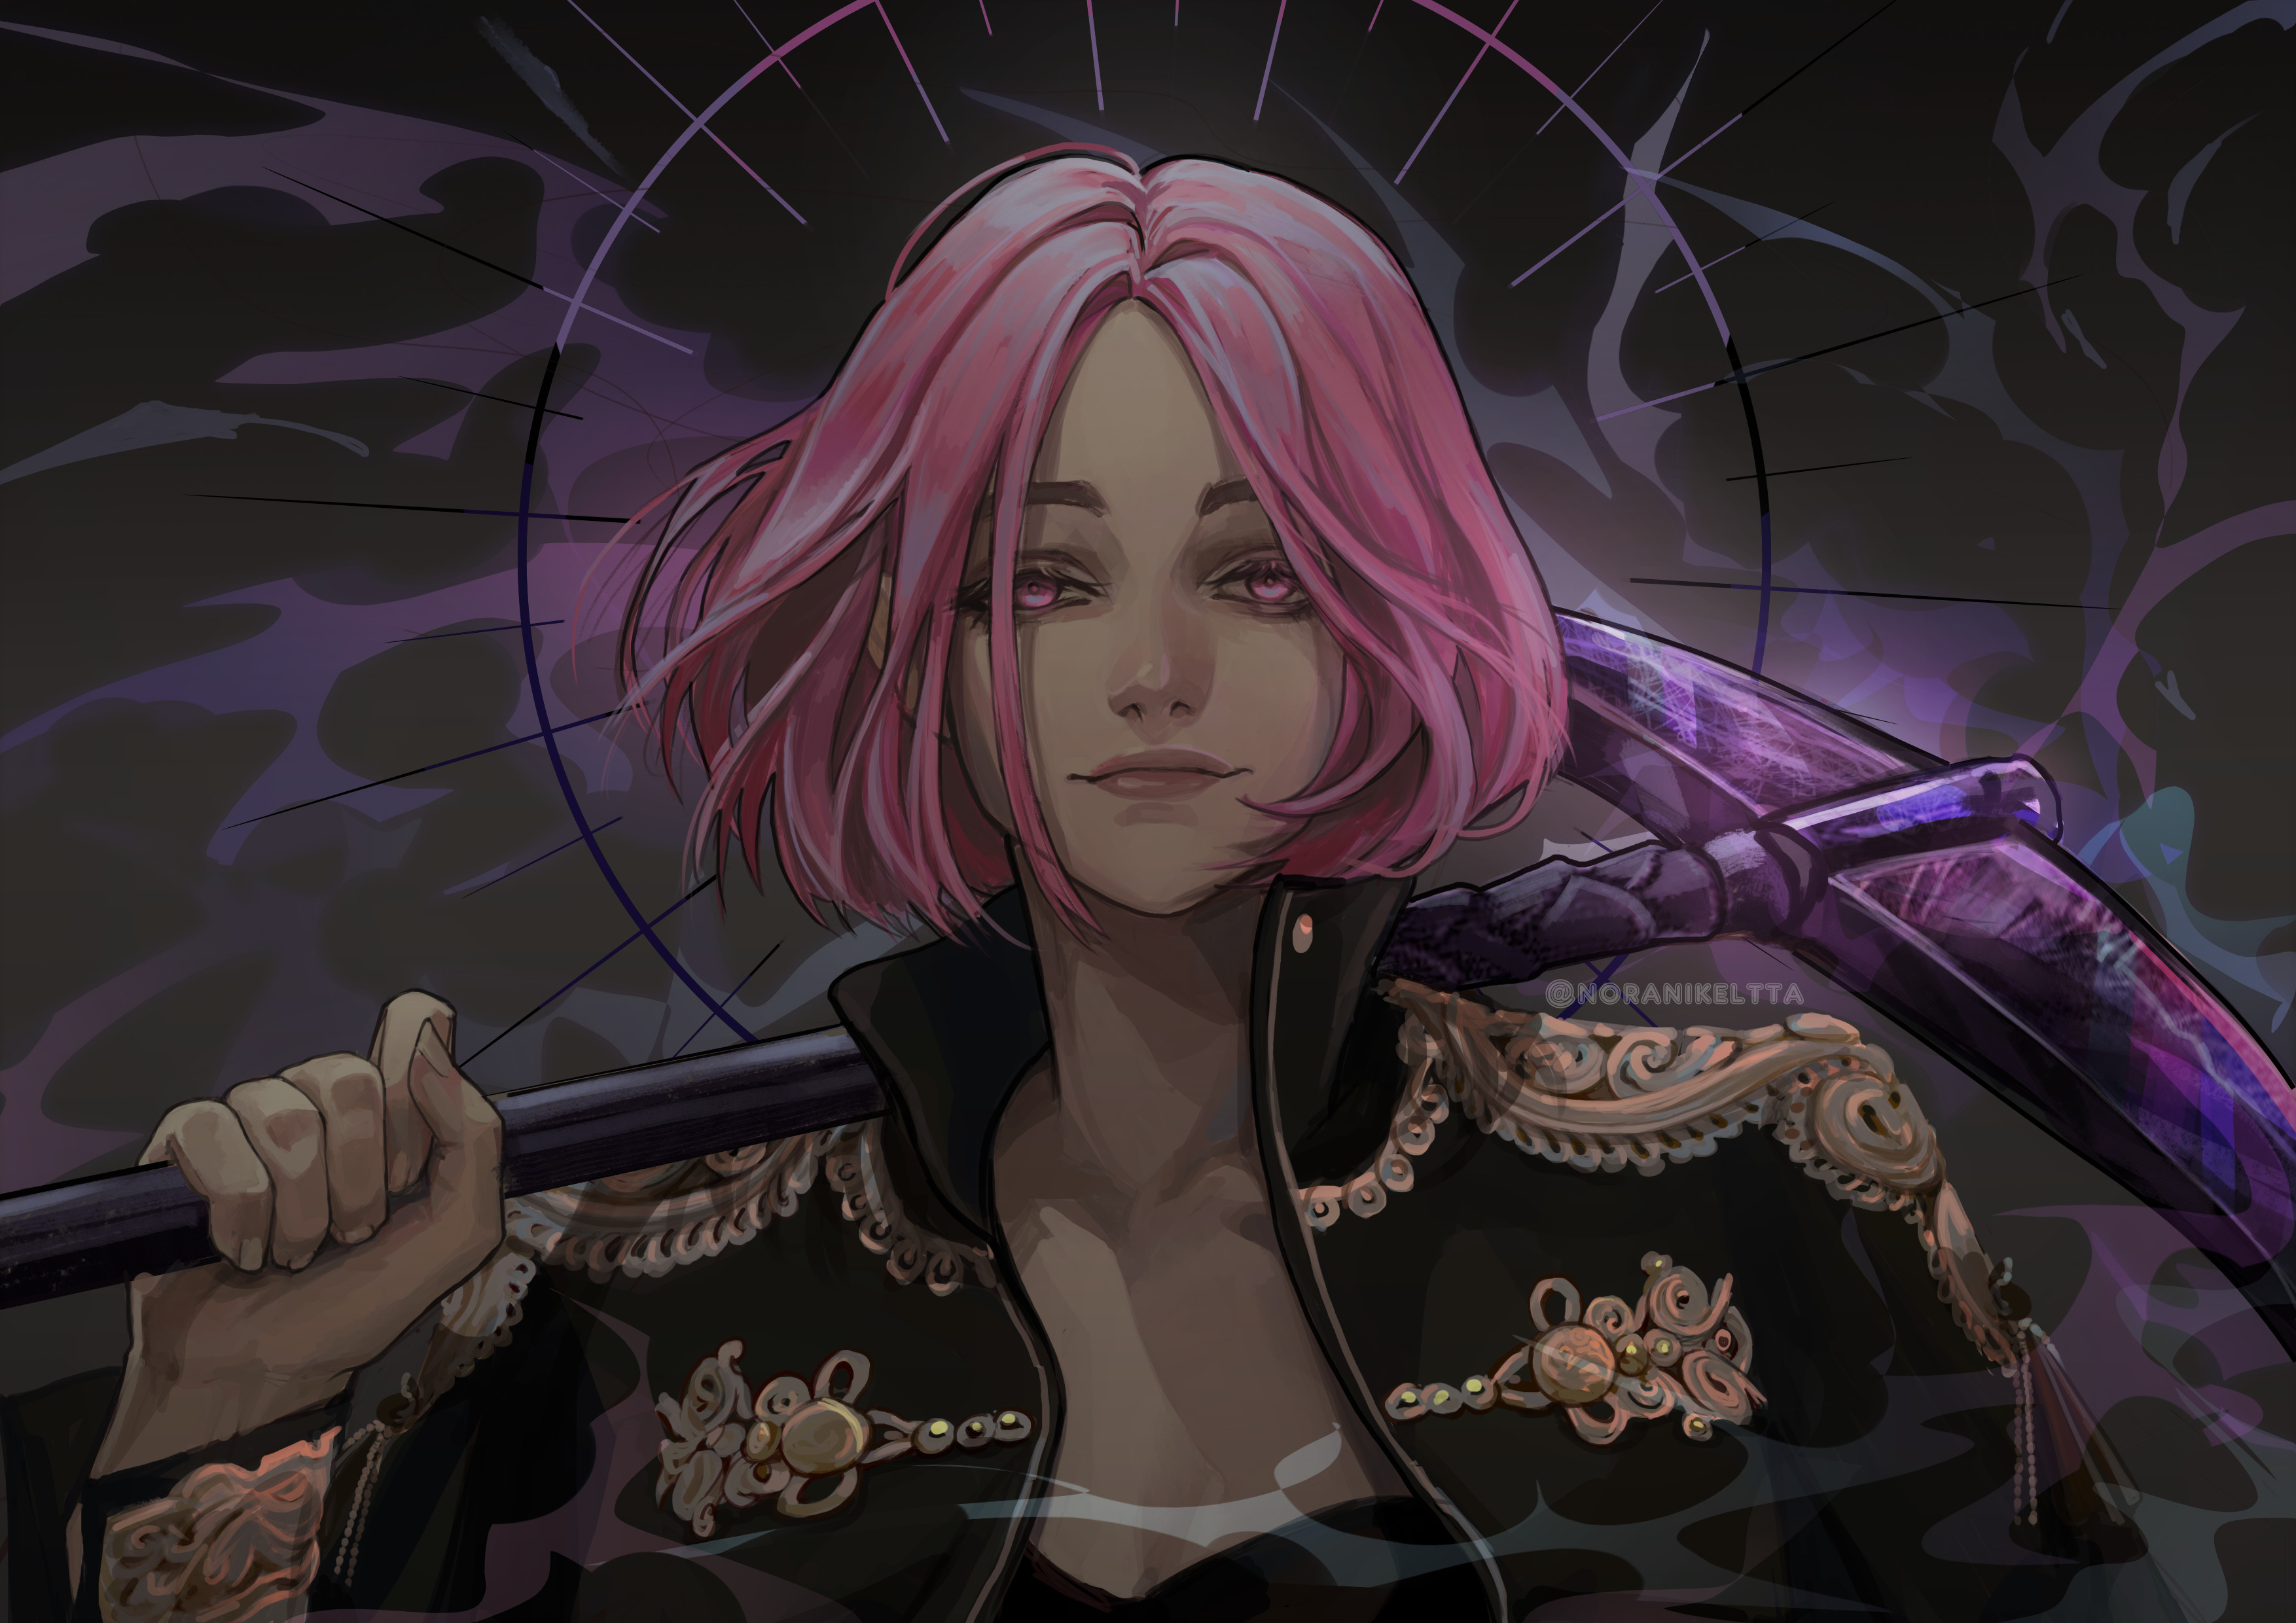 This is a drawing of Niki if she was an anime character. She is wearing a very ornate and detailed black jacket with gold trim over a simple black shirt. On her shoulder, she has an enchanted purple pickaxe. Her pink hair is cut short into a bob, and she is smiling at the camera in a very cool and collected way. Purple electricity and a minimalist Catholic/Christian halo circles behind her.